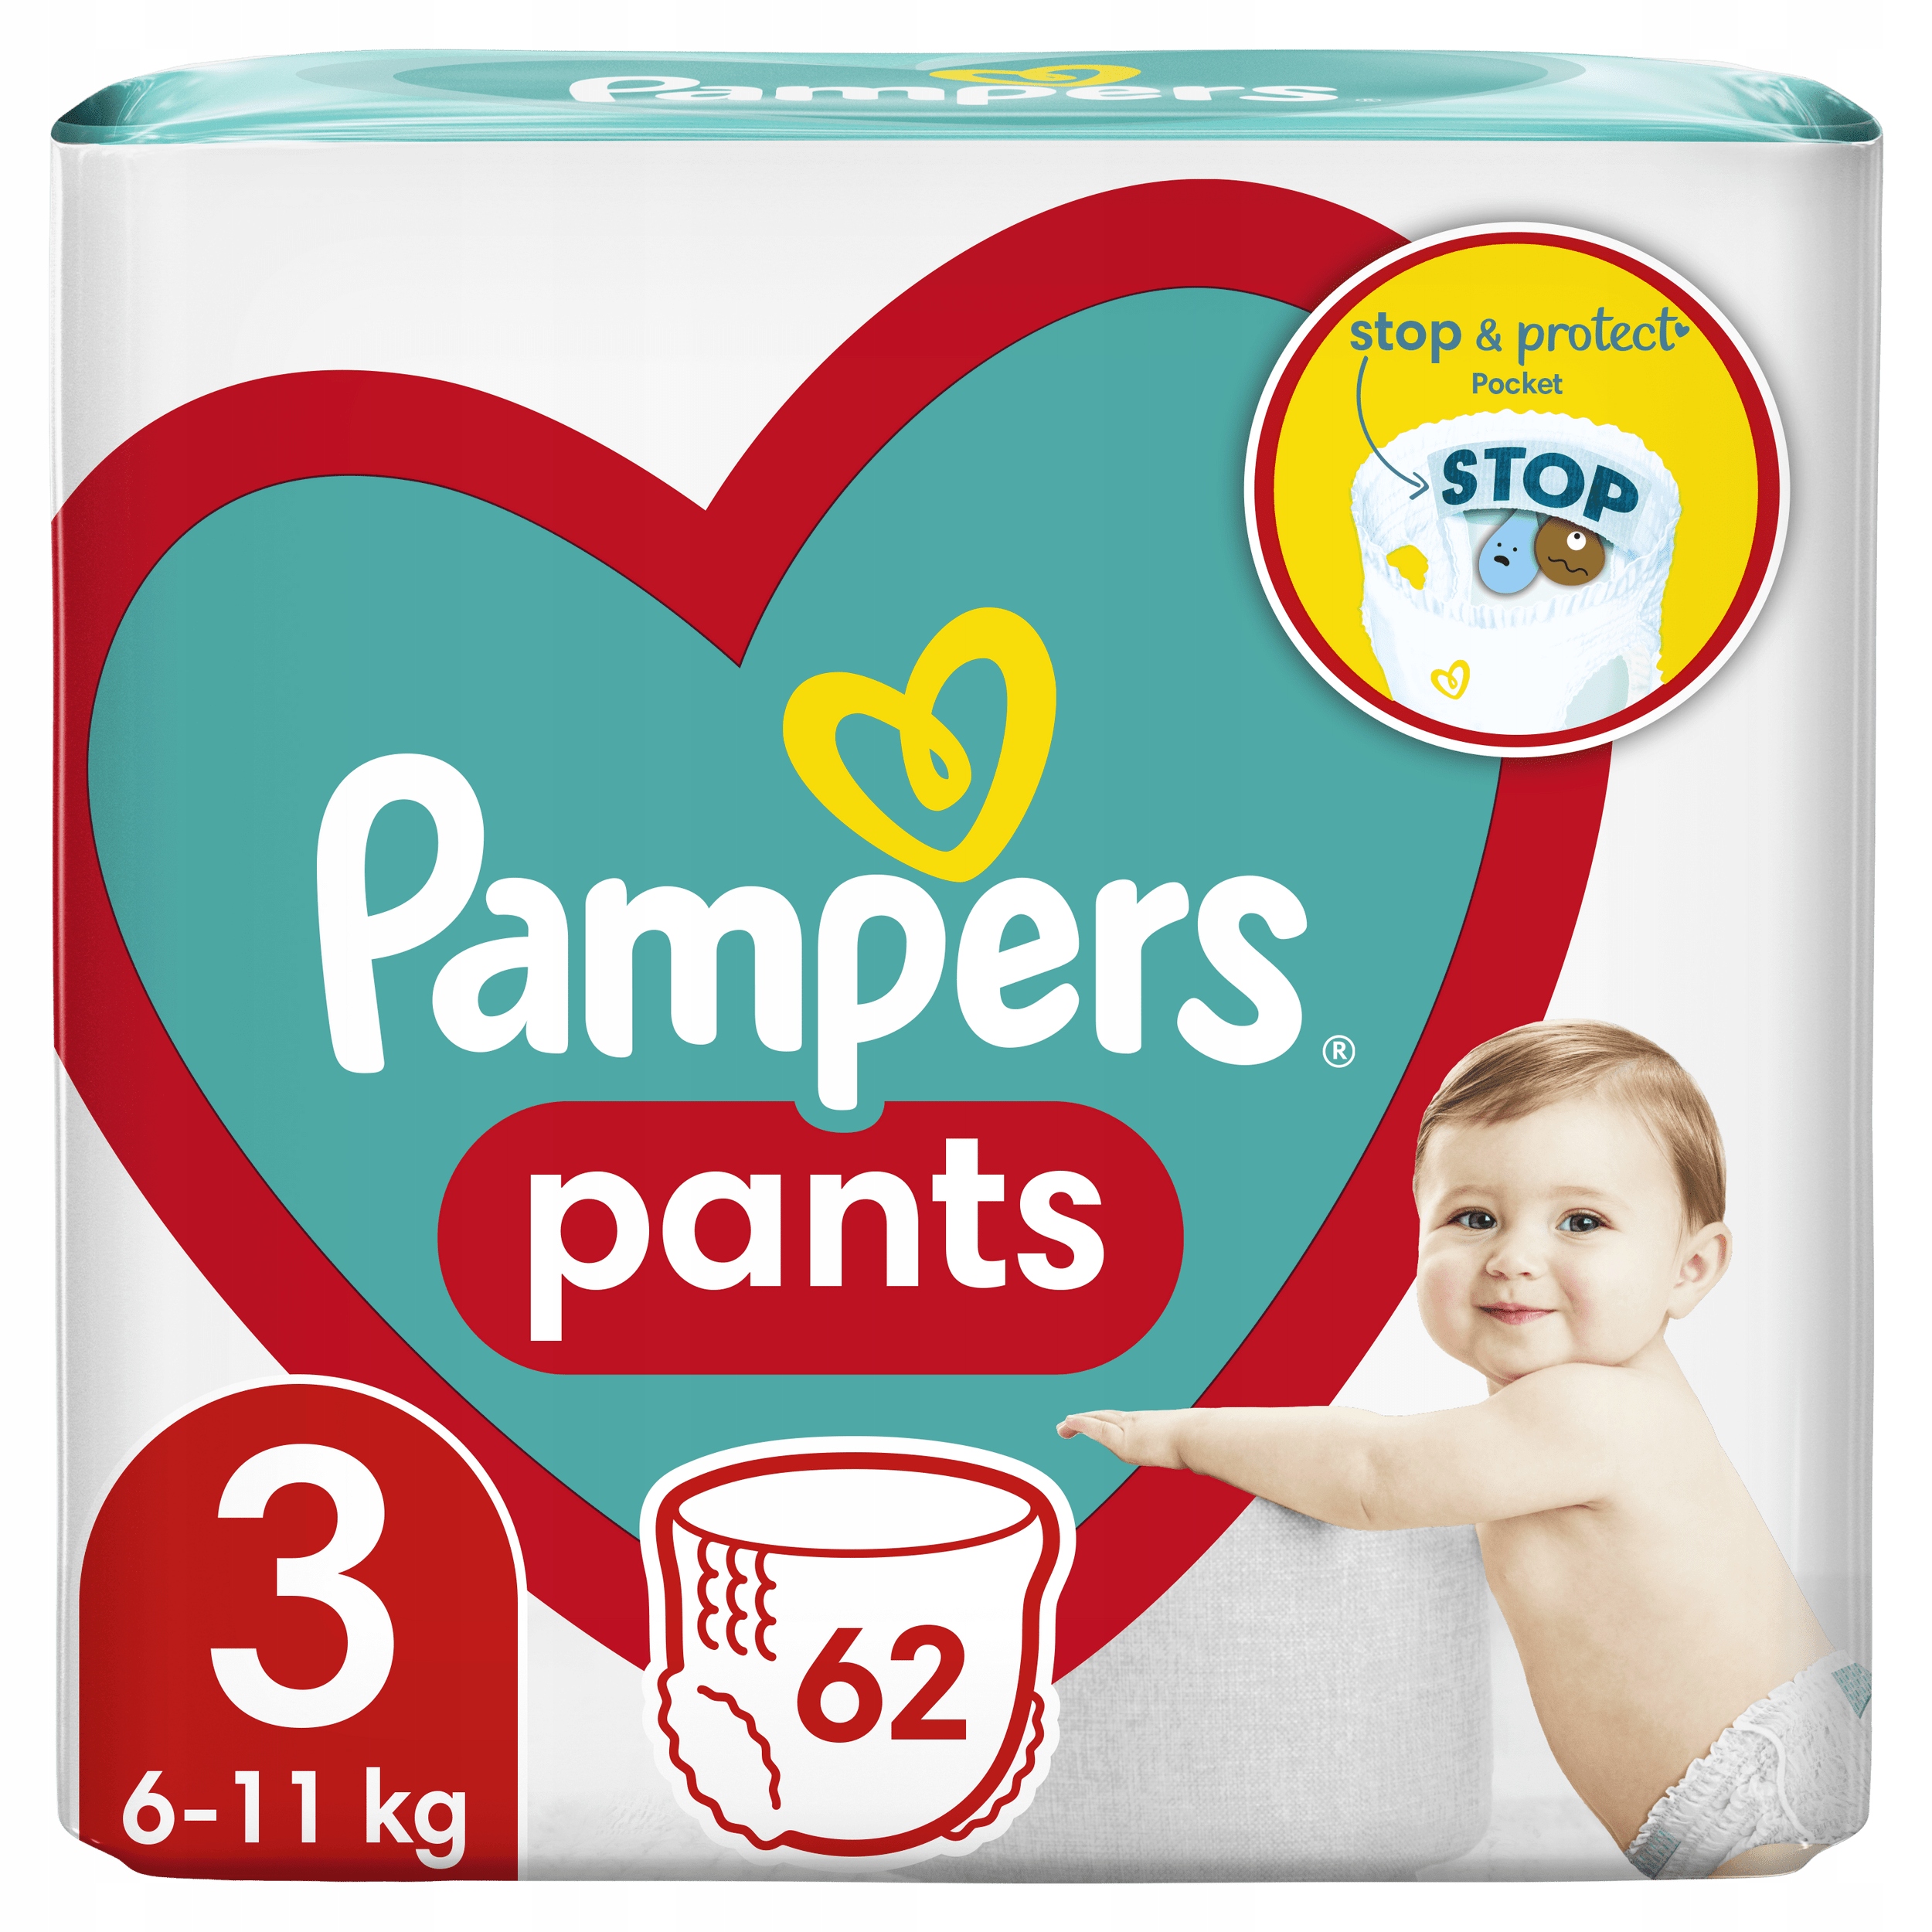 pampers 66